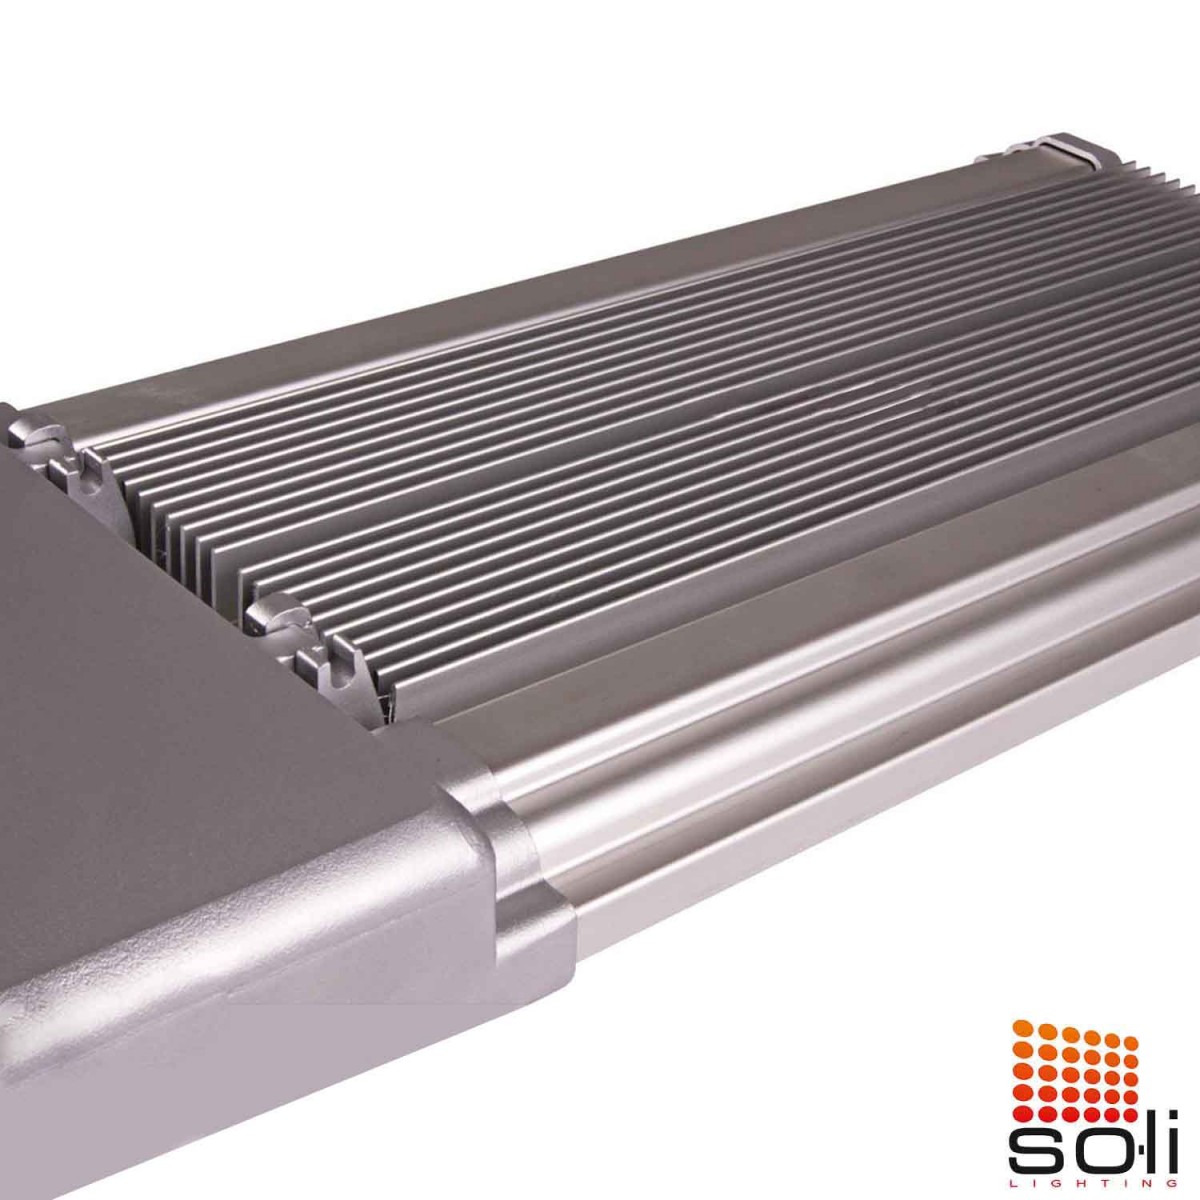 200W SK Series LED Road and Street Lighting Fixture - SK200